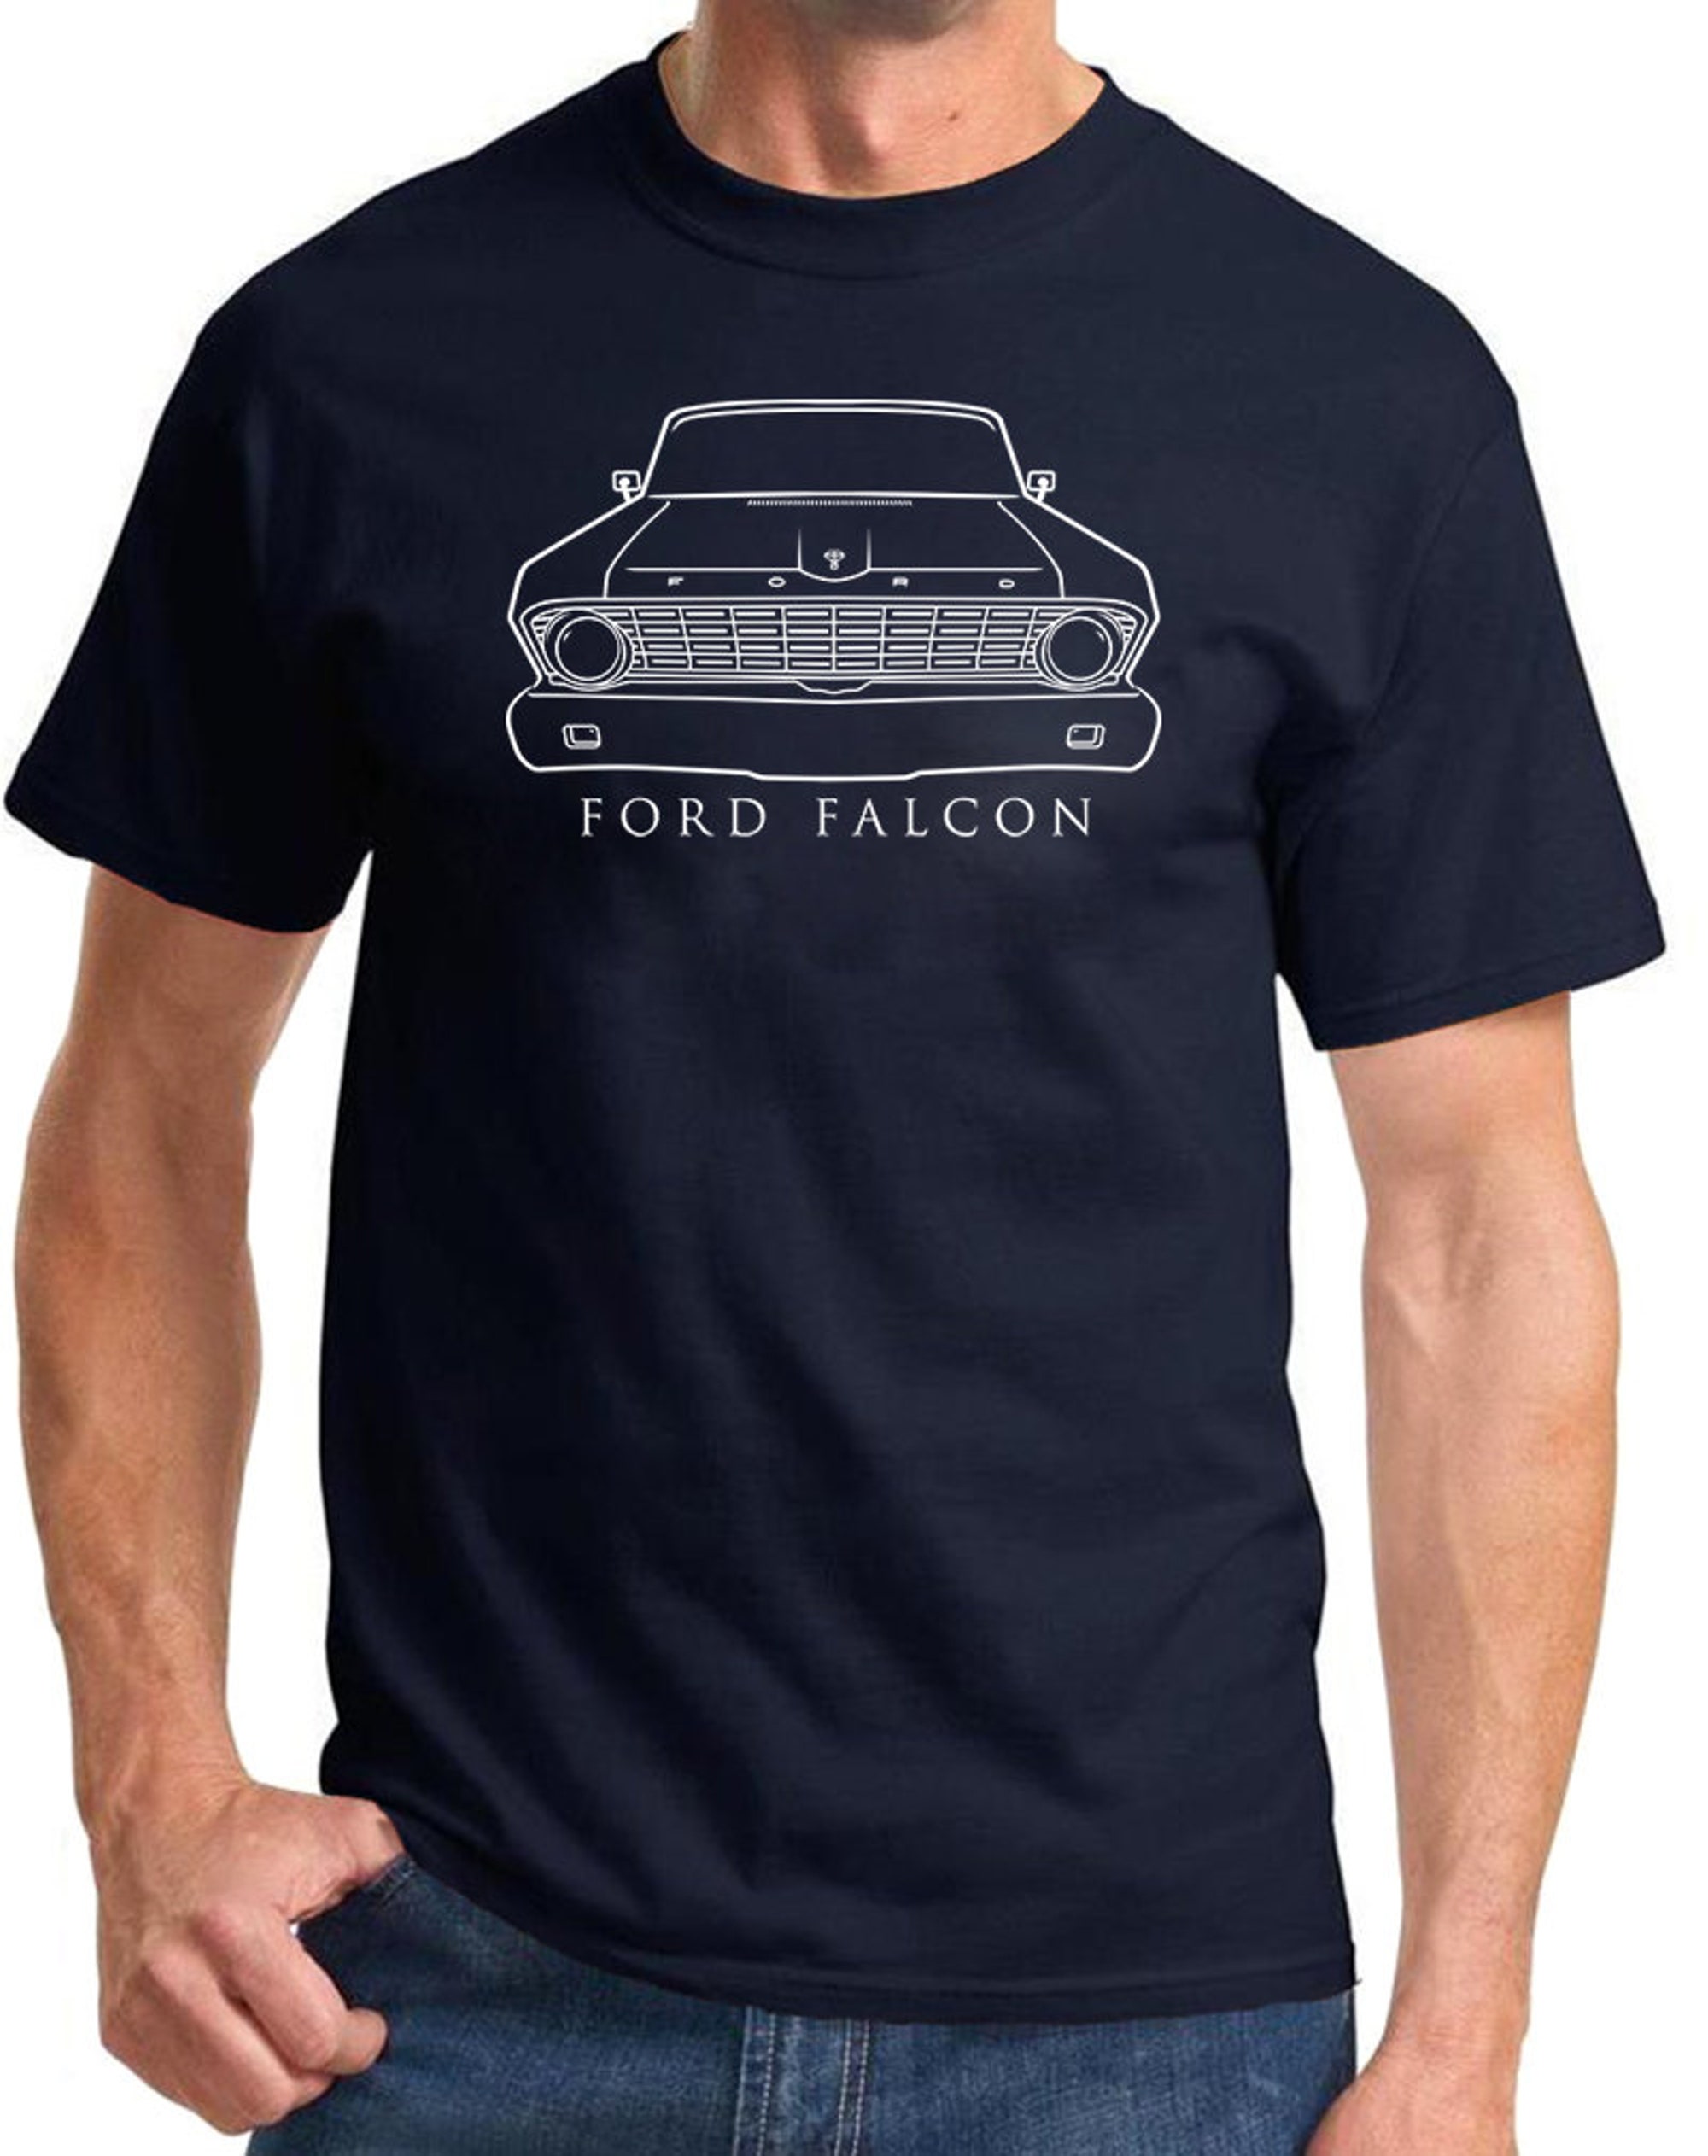 Discover 1964 Ford Falcon T-Shirt